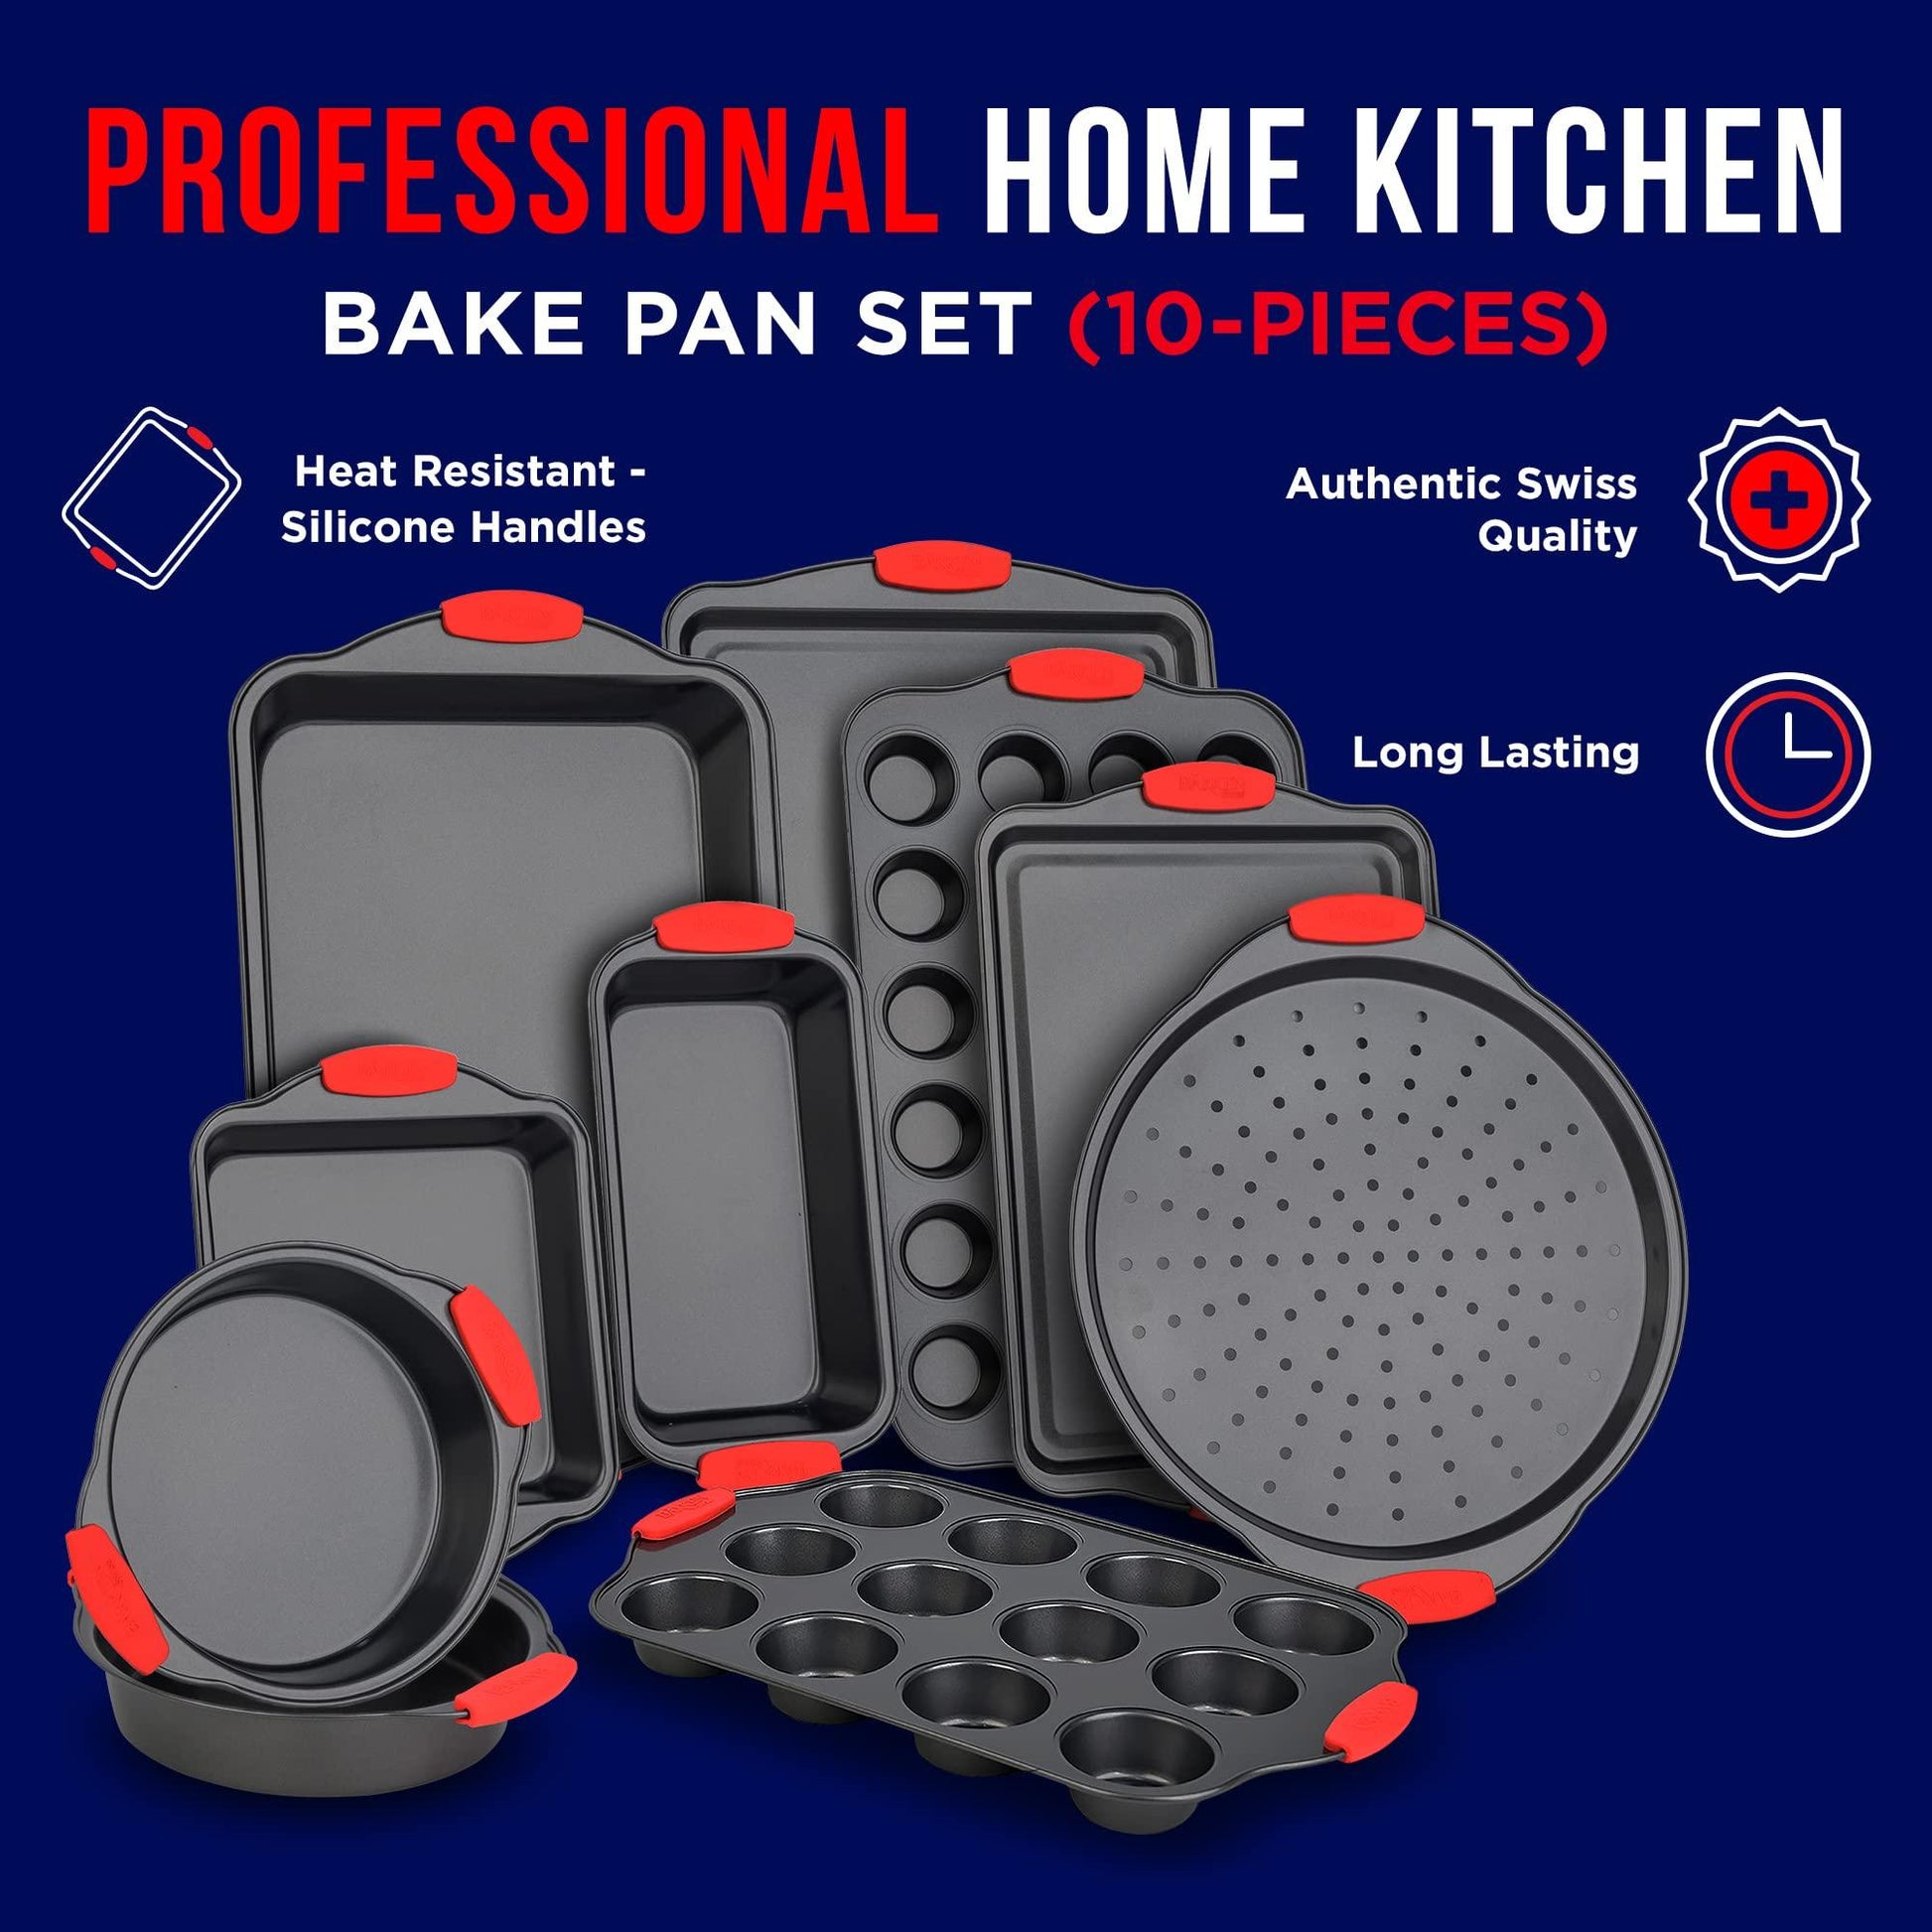 Baking Set – 10 Piece Kitchen Oven Bakeware Set – Deluxe Non-Stick Blue Coating Inside and Outside – Carbon Steel – Red Silicone Handles – PFOA PFOS and PTFE Free by Bakken,Black - CookCave